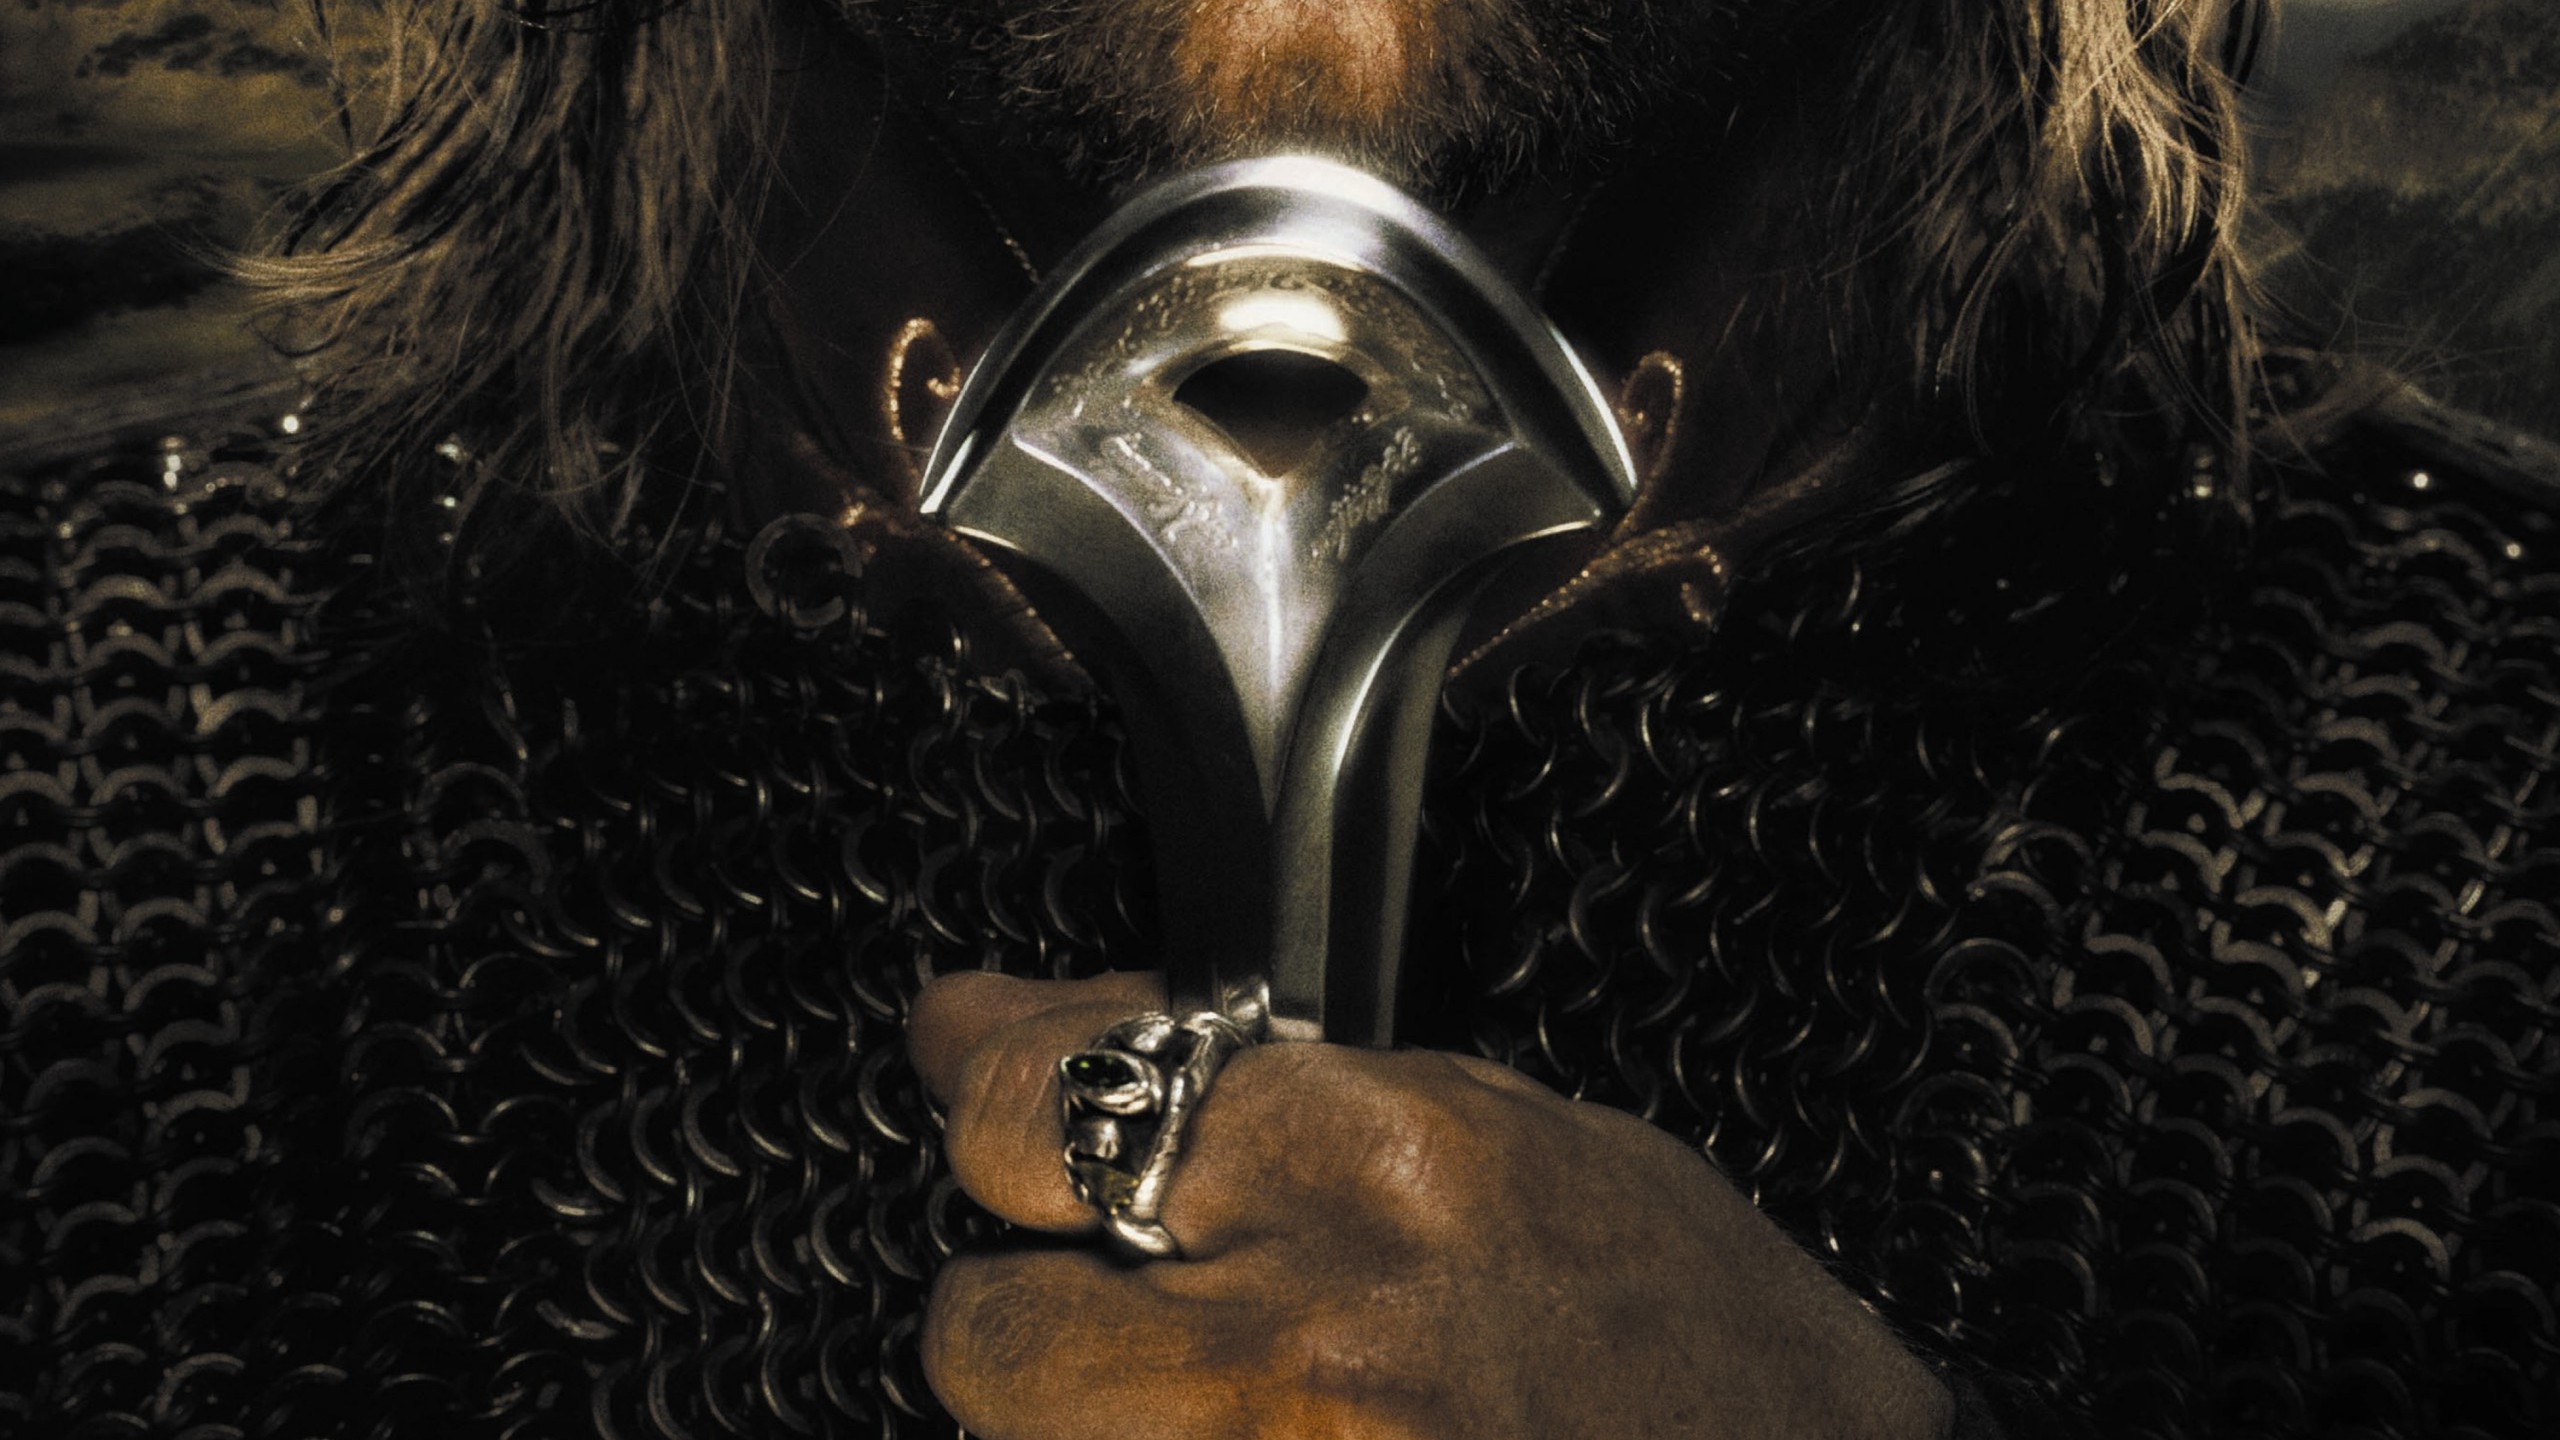 Movies The Lord Of The Rings Aragorn Viggo Mortensen - Hero Of The Lord Of The Rings - HD Wallpaper 